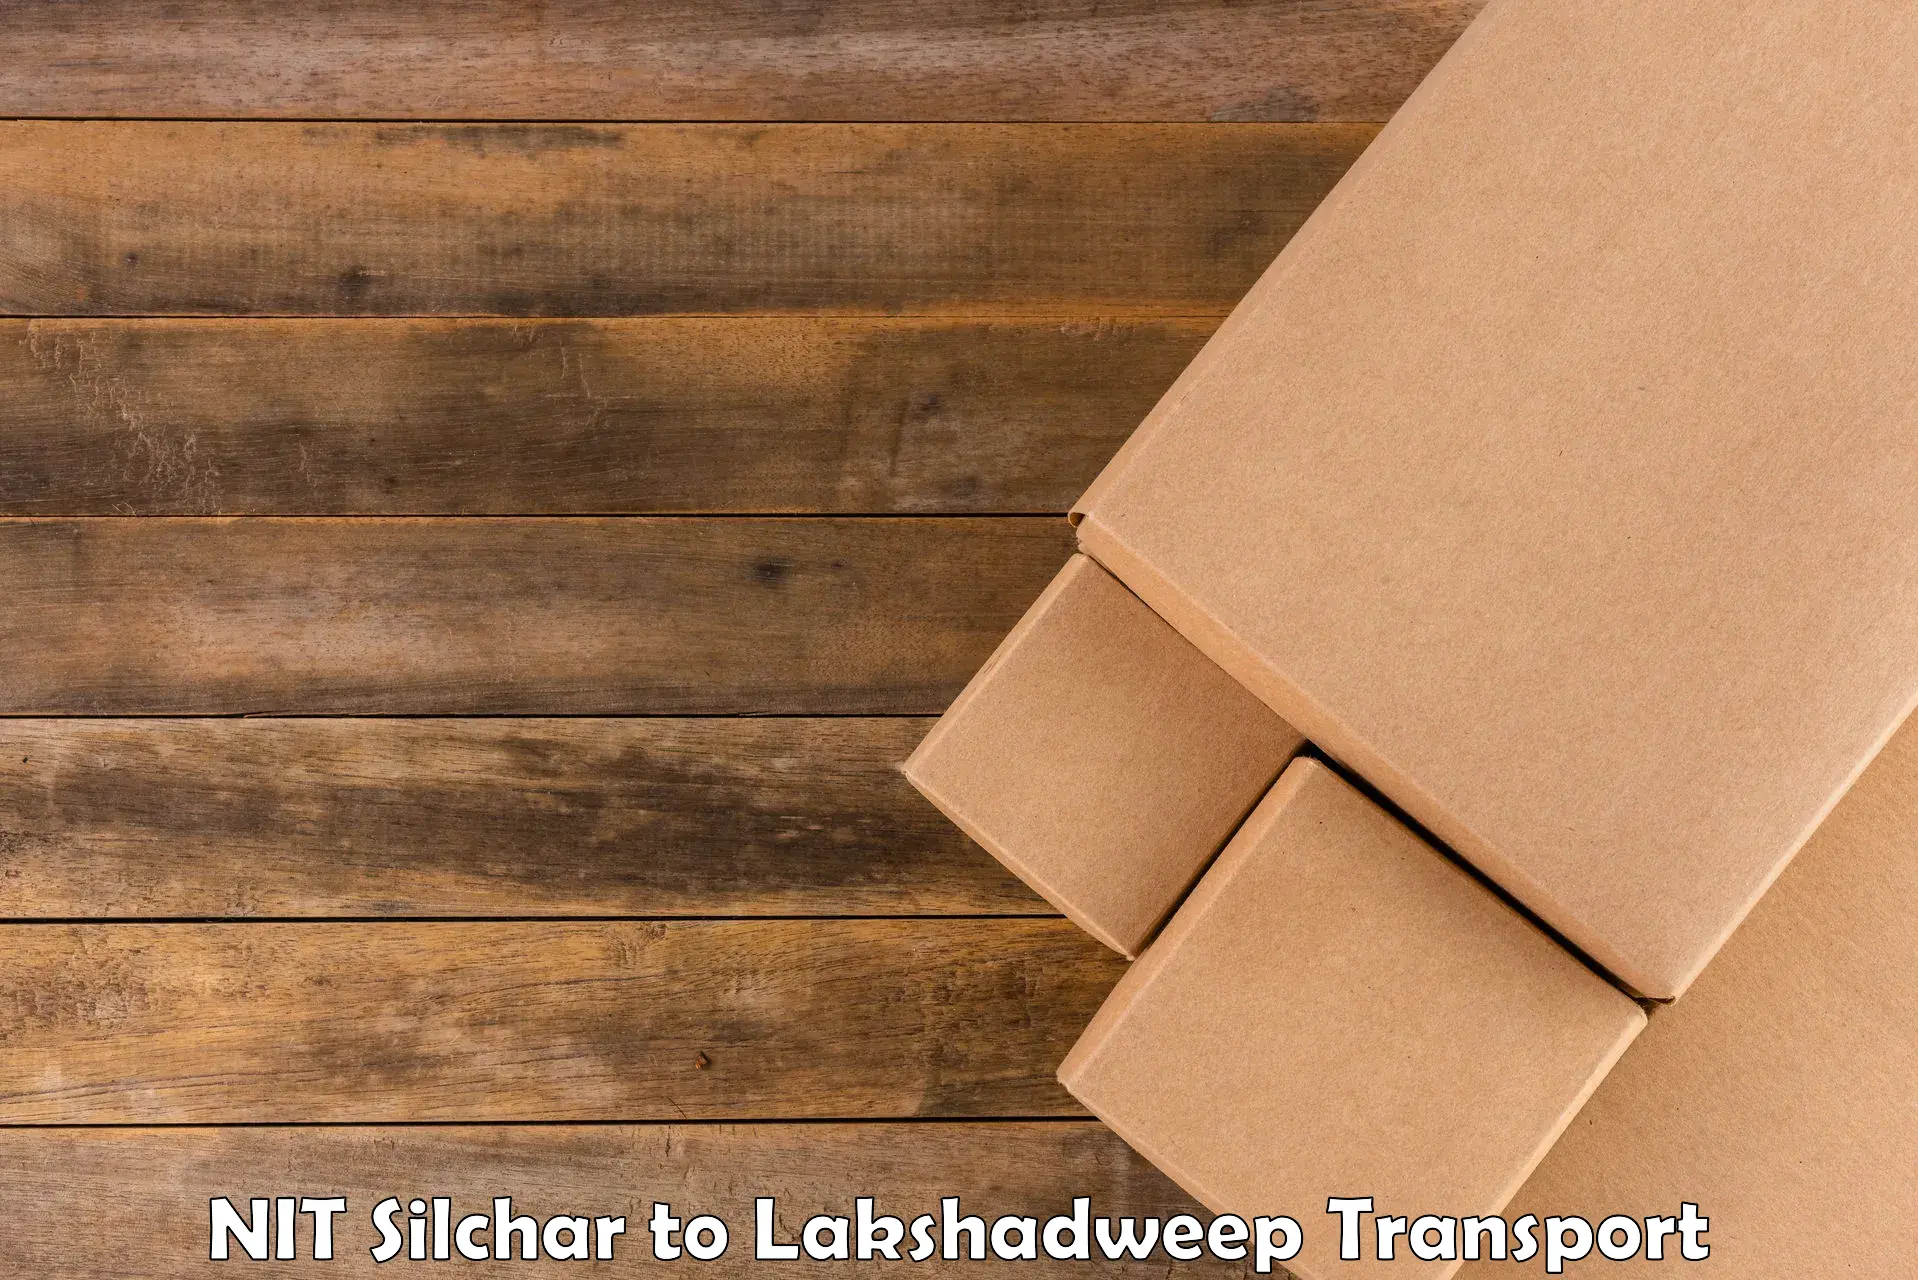 Nearby transport service NIT Silchar to Lakshadweep